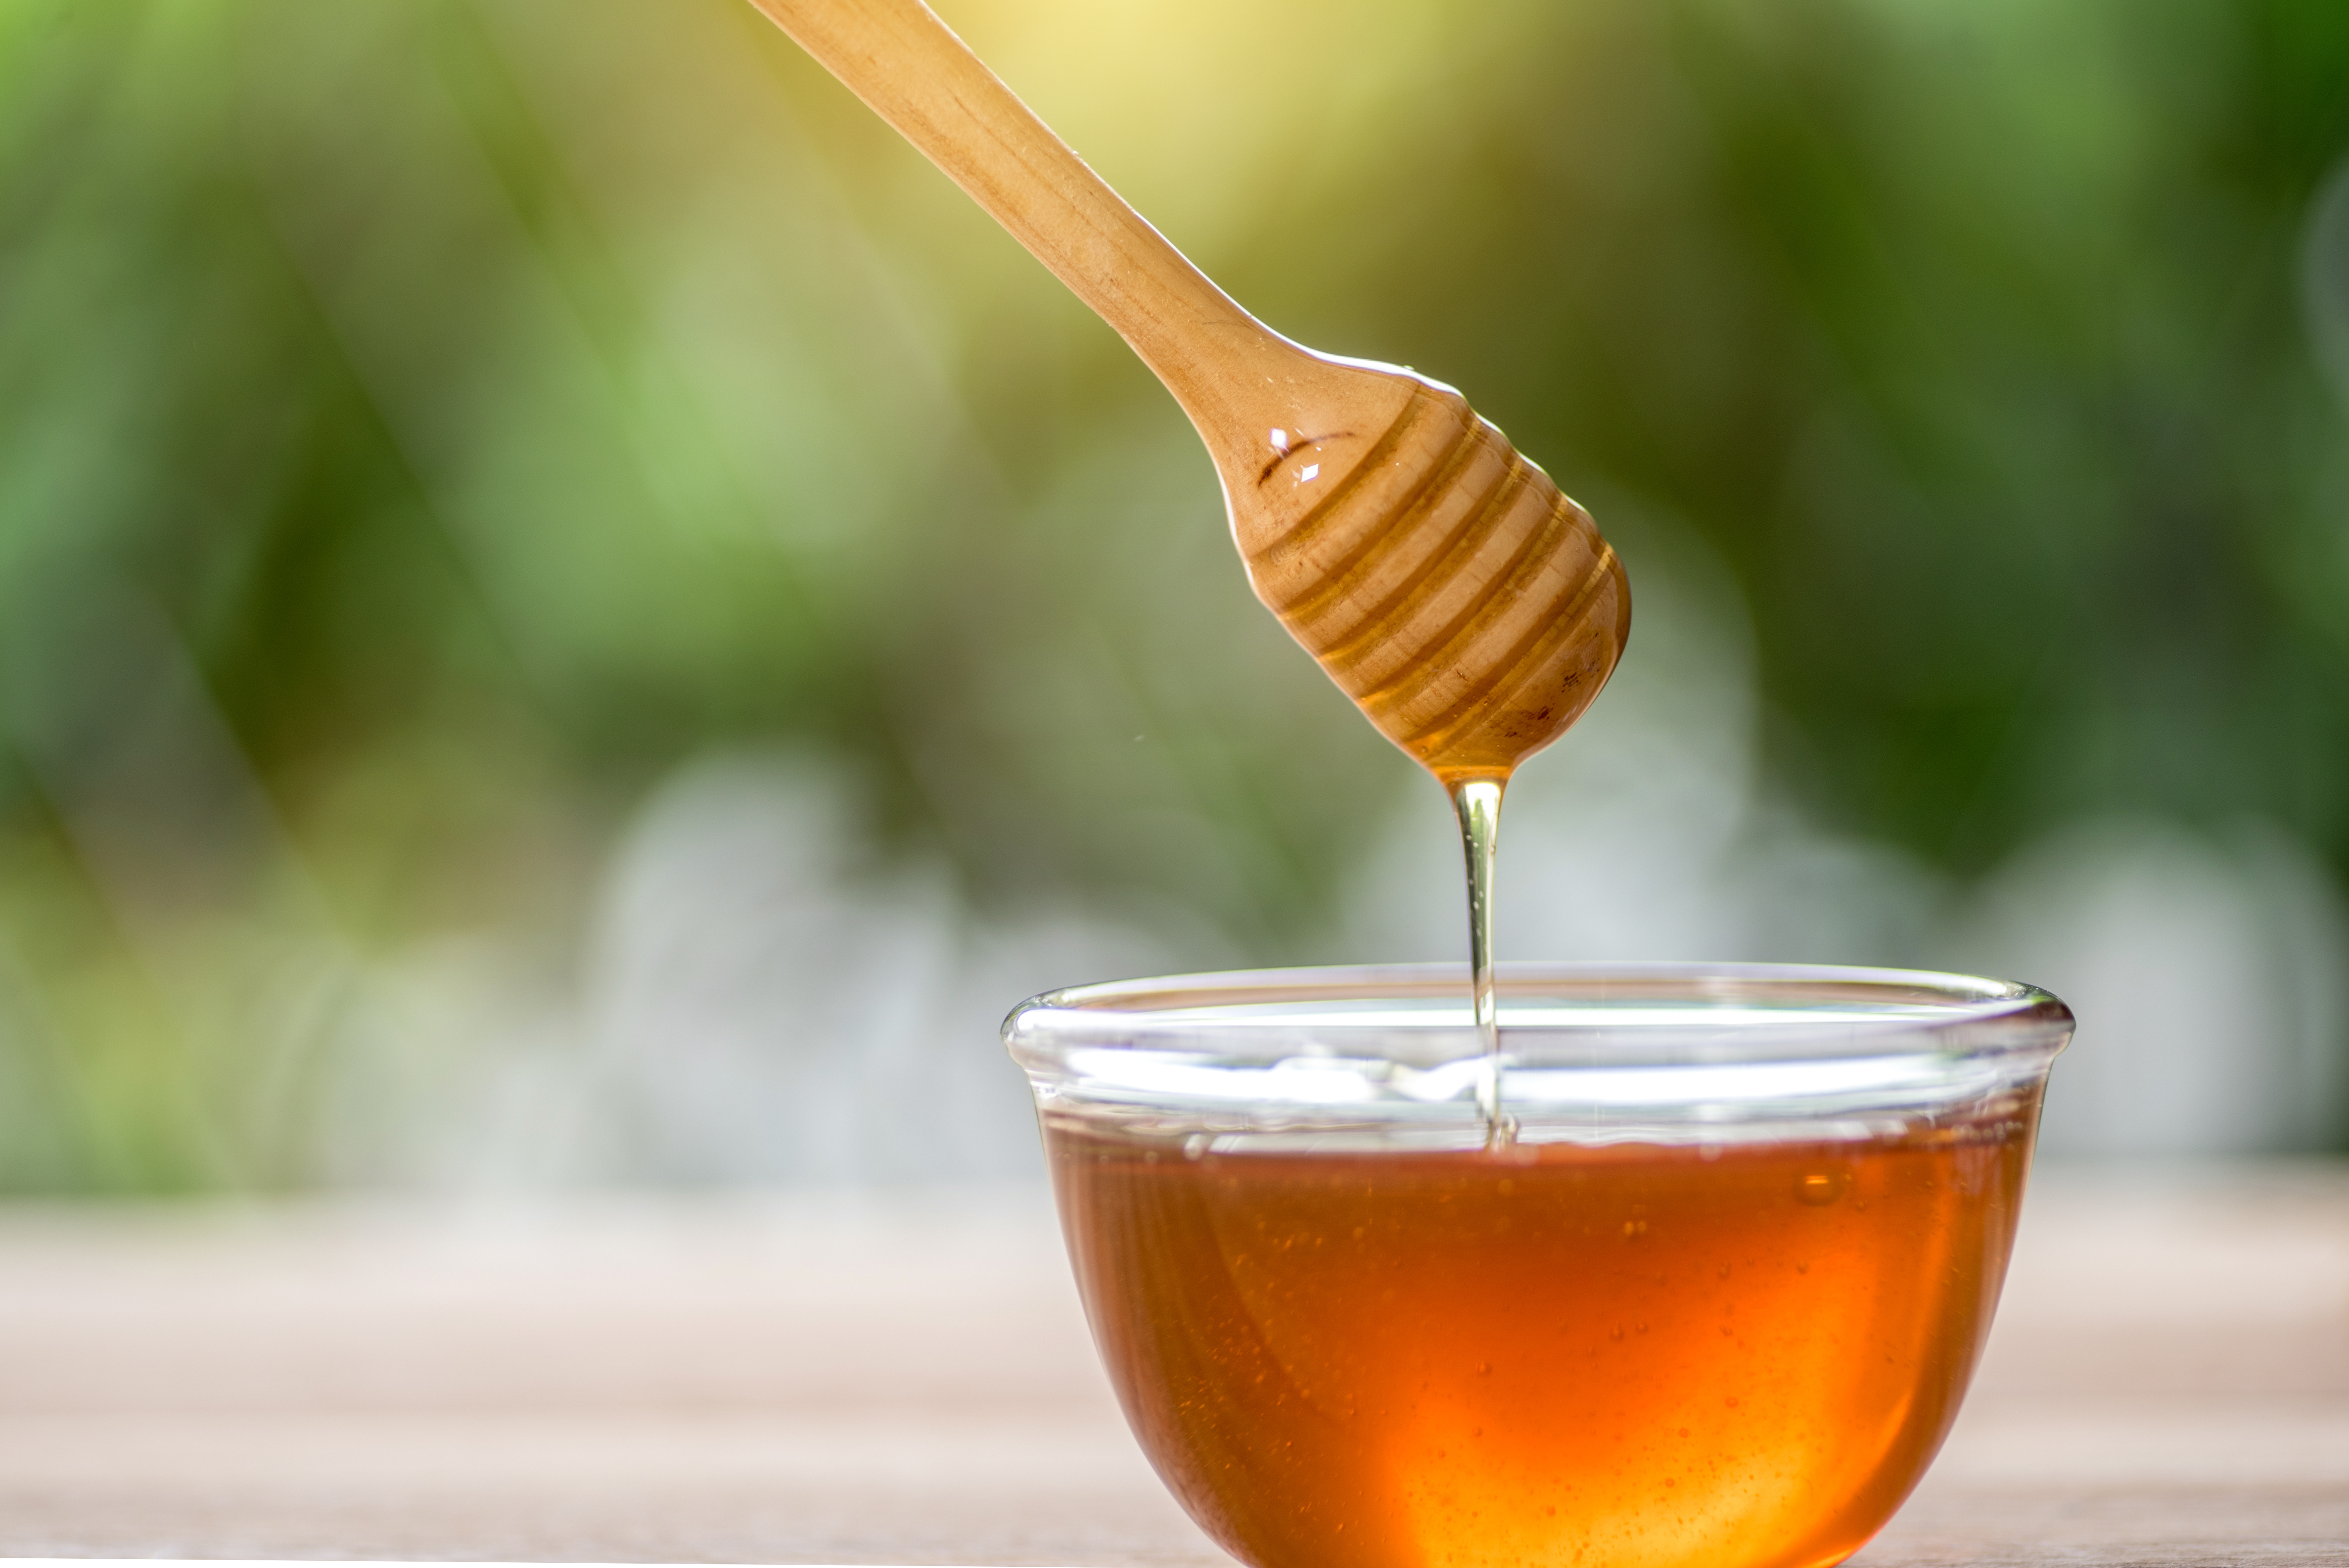 IV. How to Pair Honey with Food and Drinks